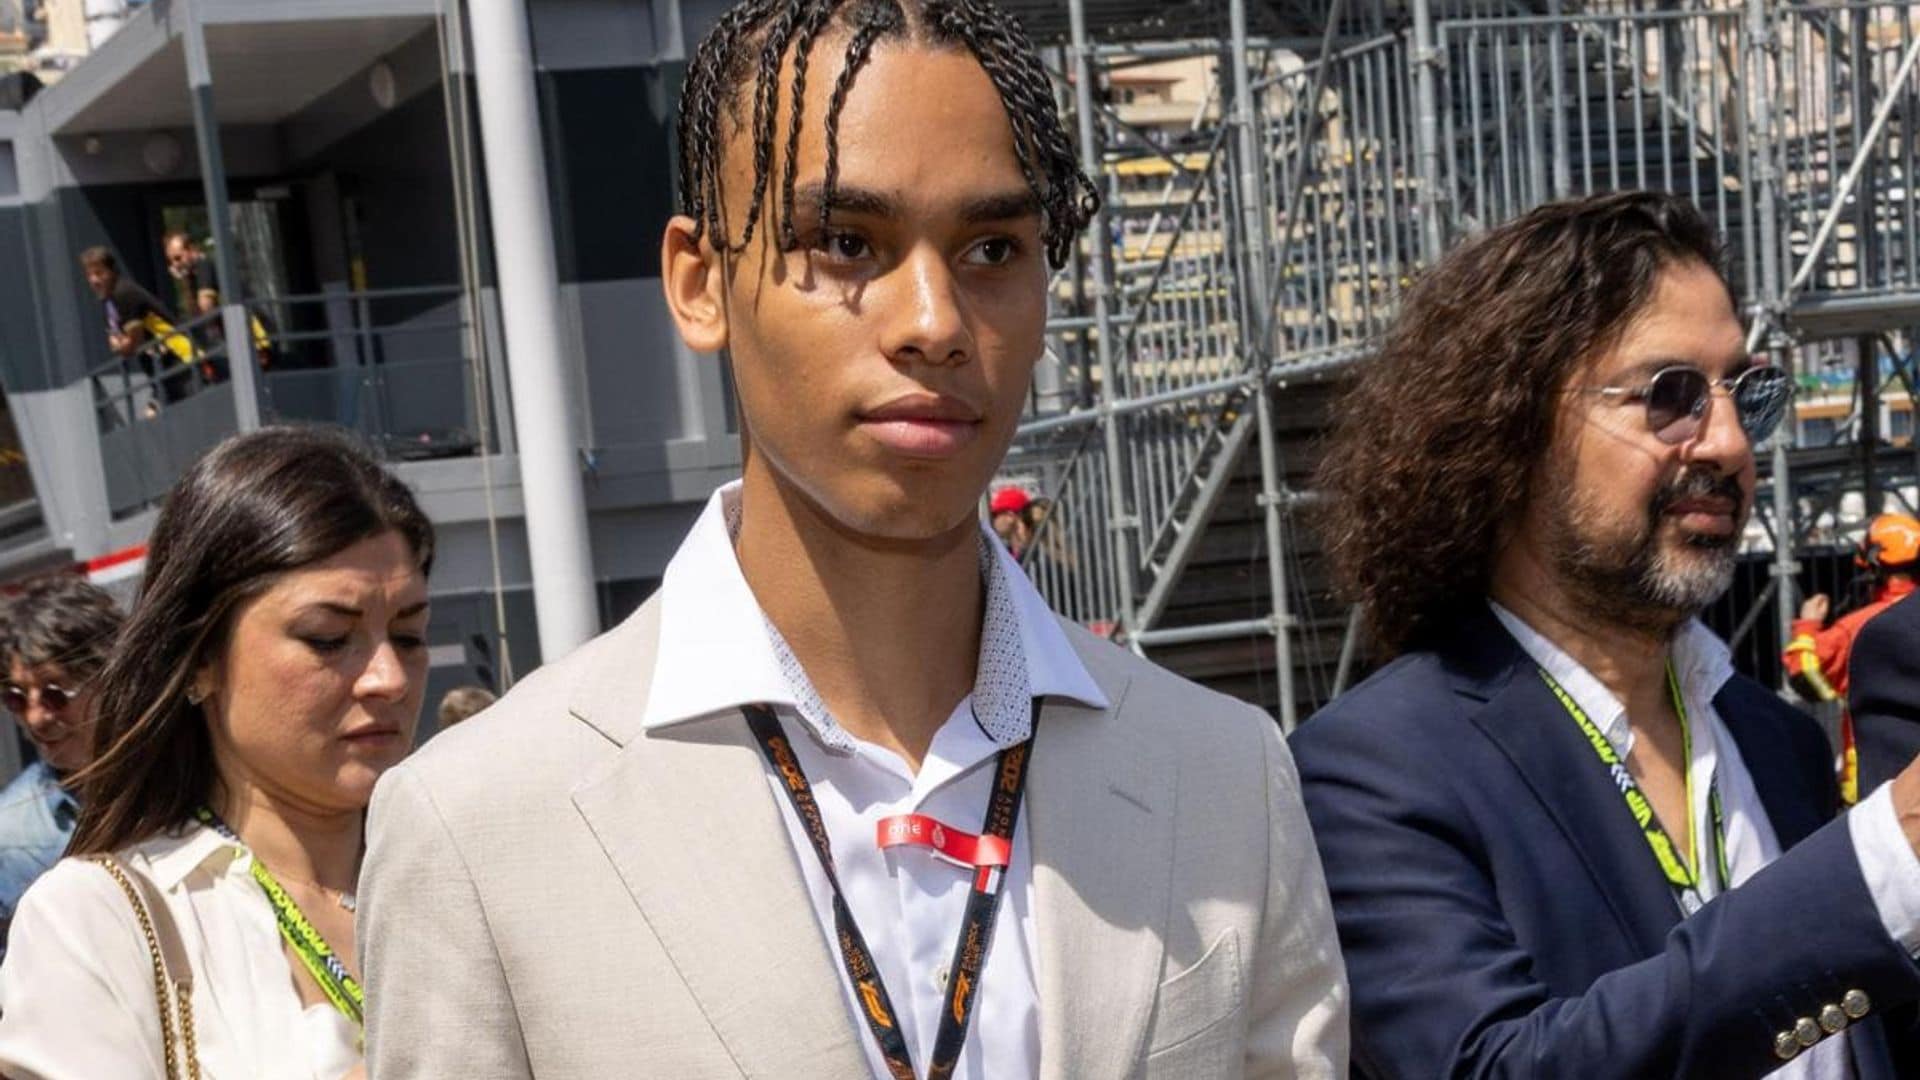 Prince Albert’s son Alexandre makes appearance at Monaco Grand Prix with family member